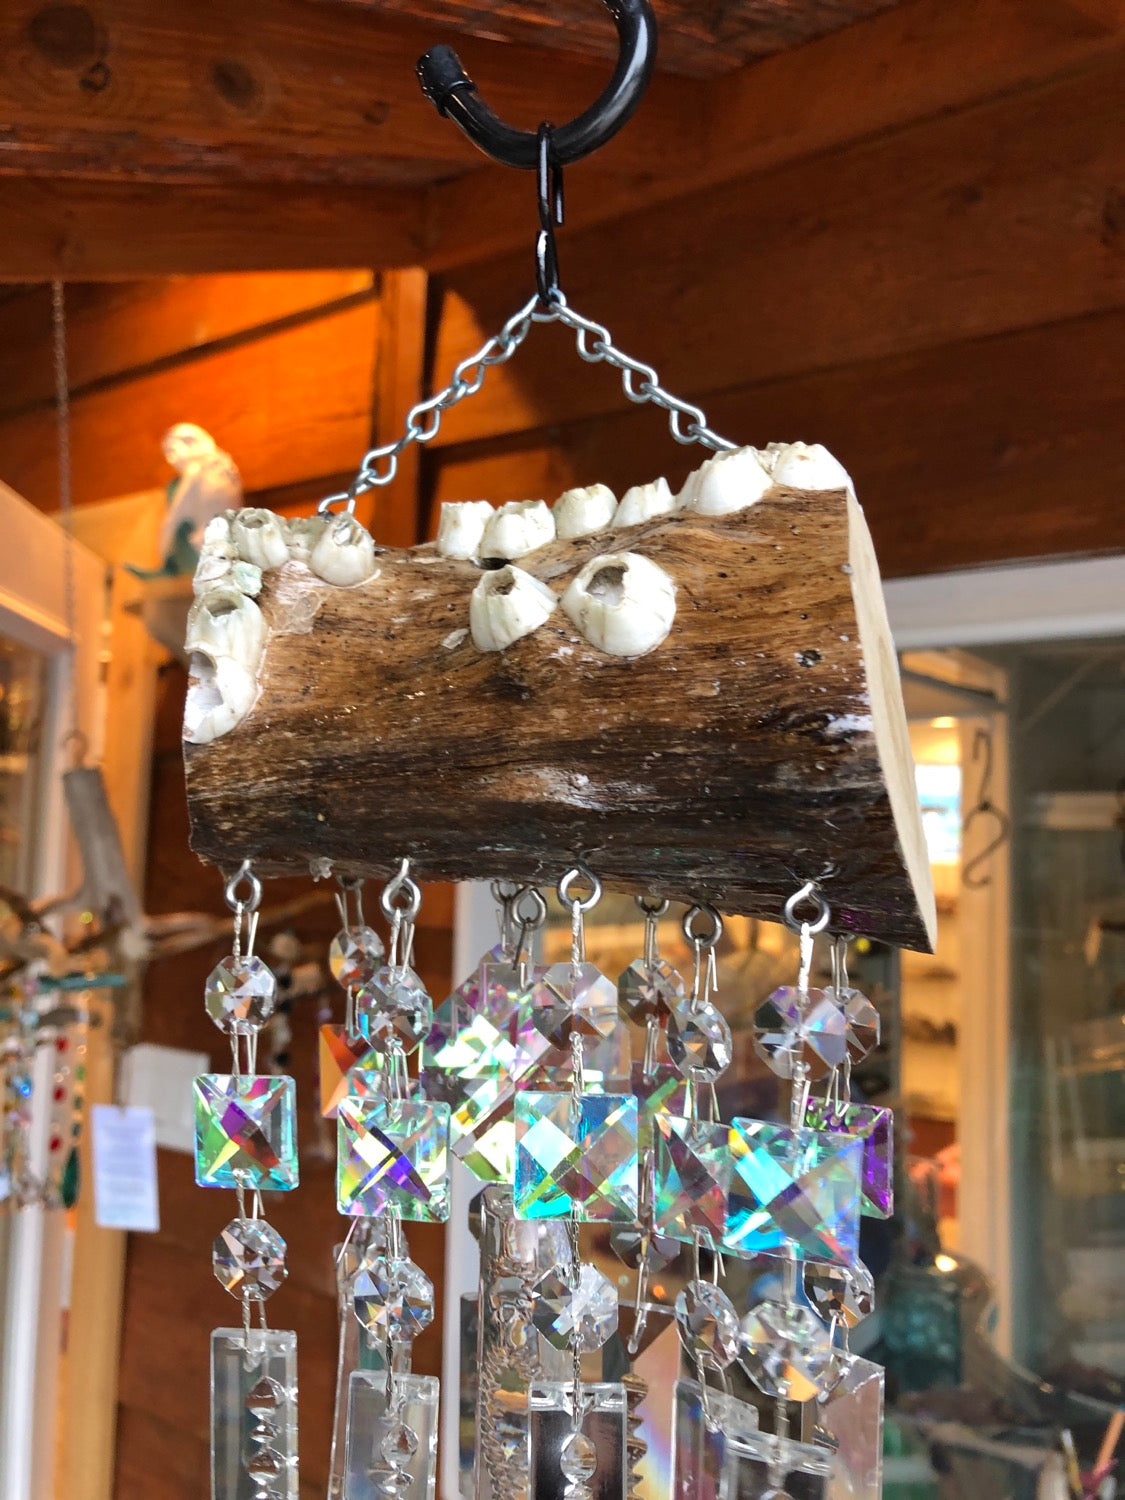 epoxied barnacles and driftwood wind-chime 11 chandelier crystals